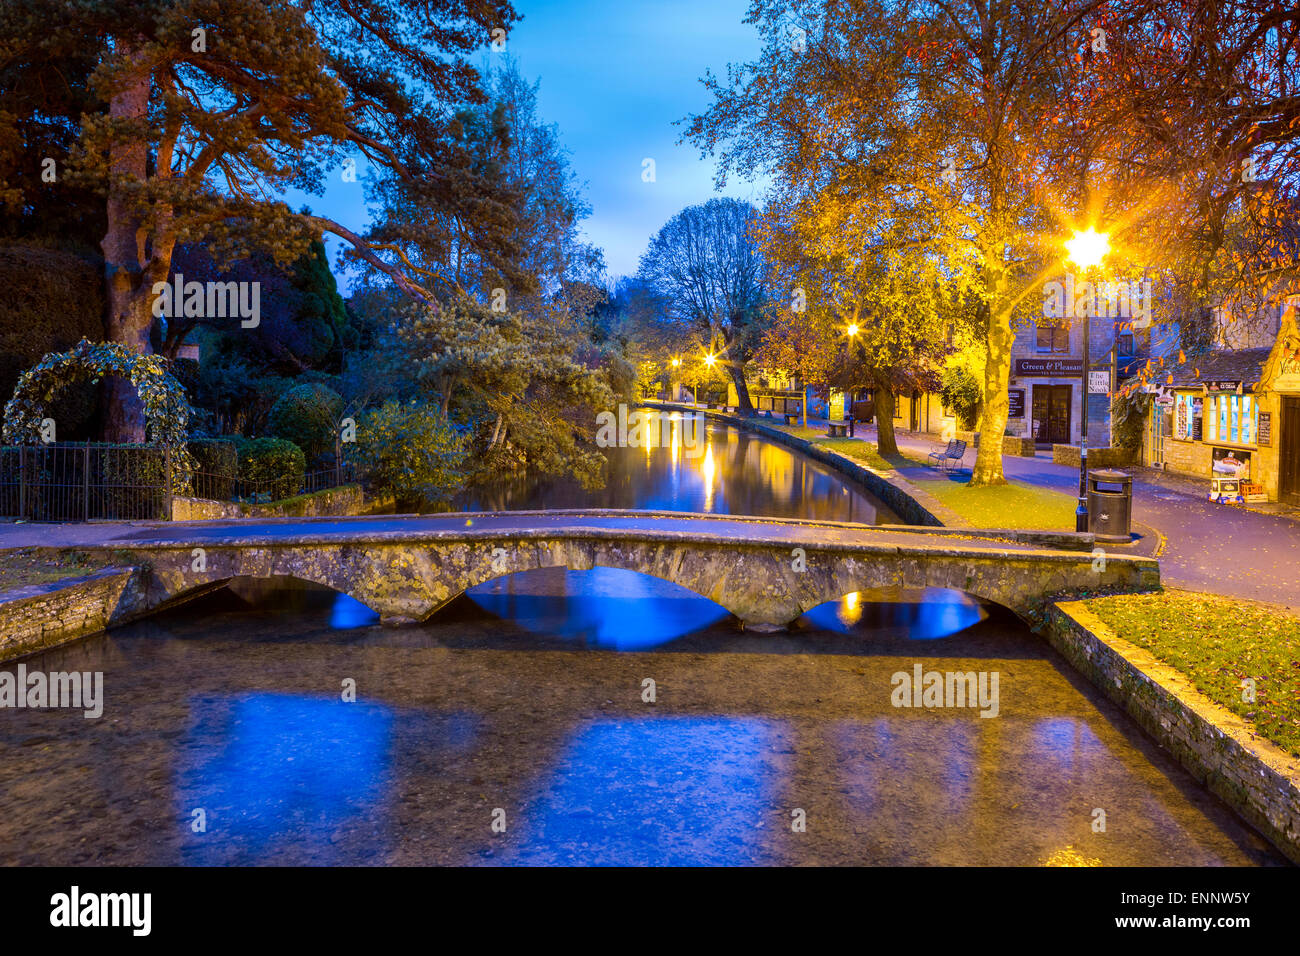 Bourton-on-the-water, Gloucestershire, Angleterre, Royaume-Uni, Europe. Banque D'Images